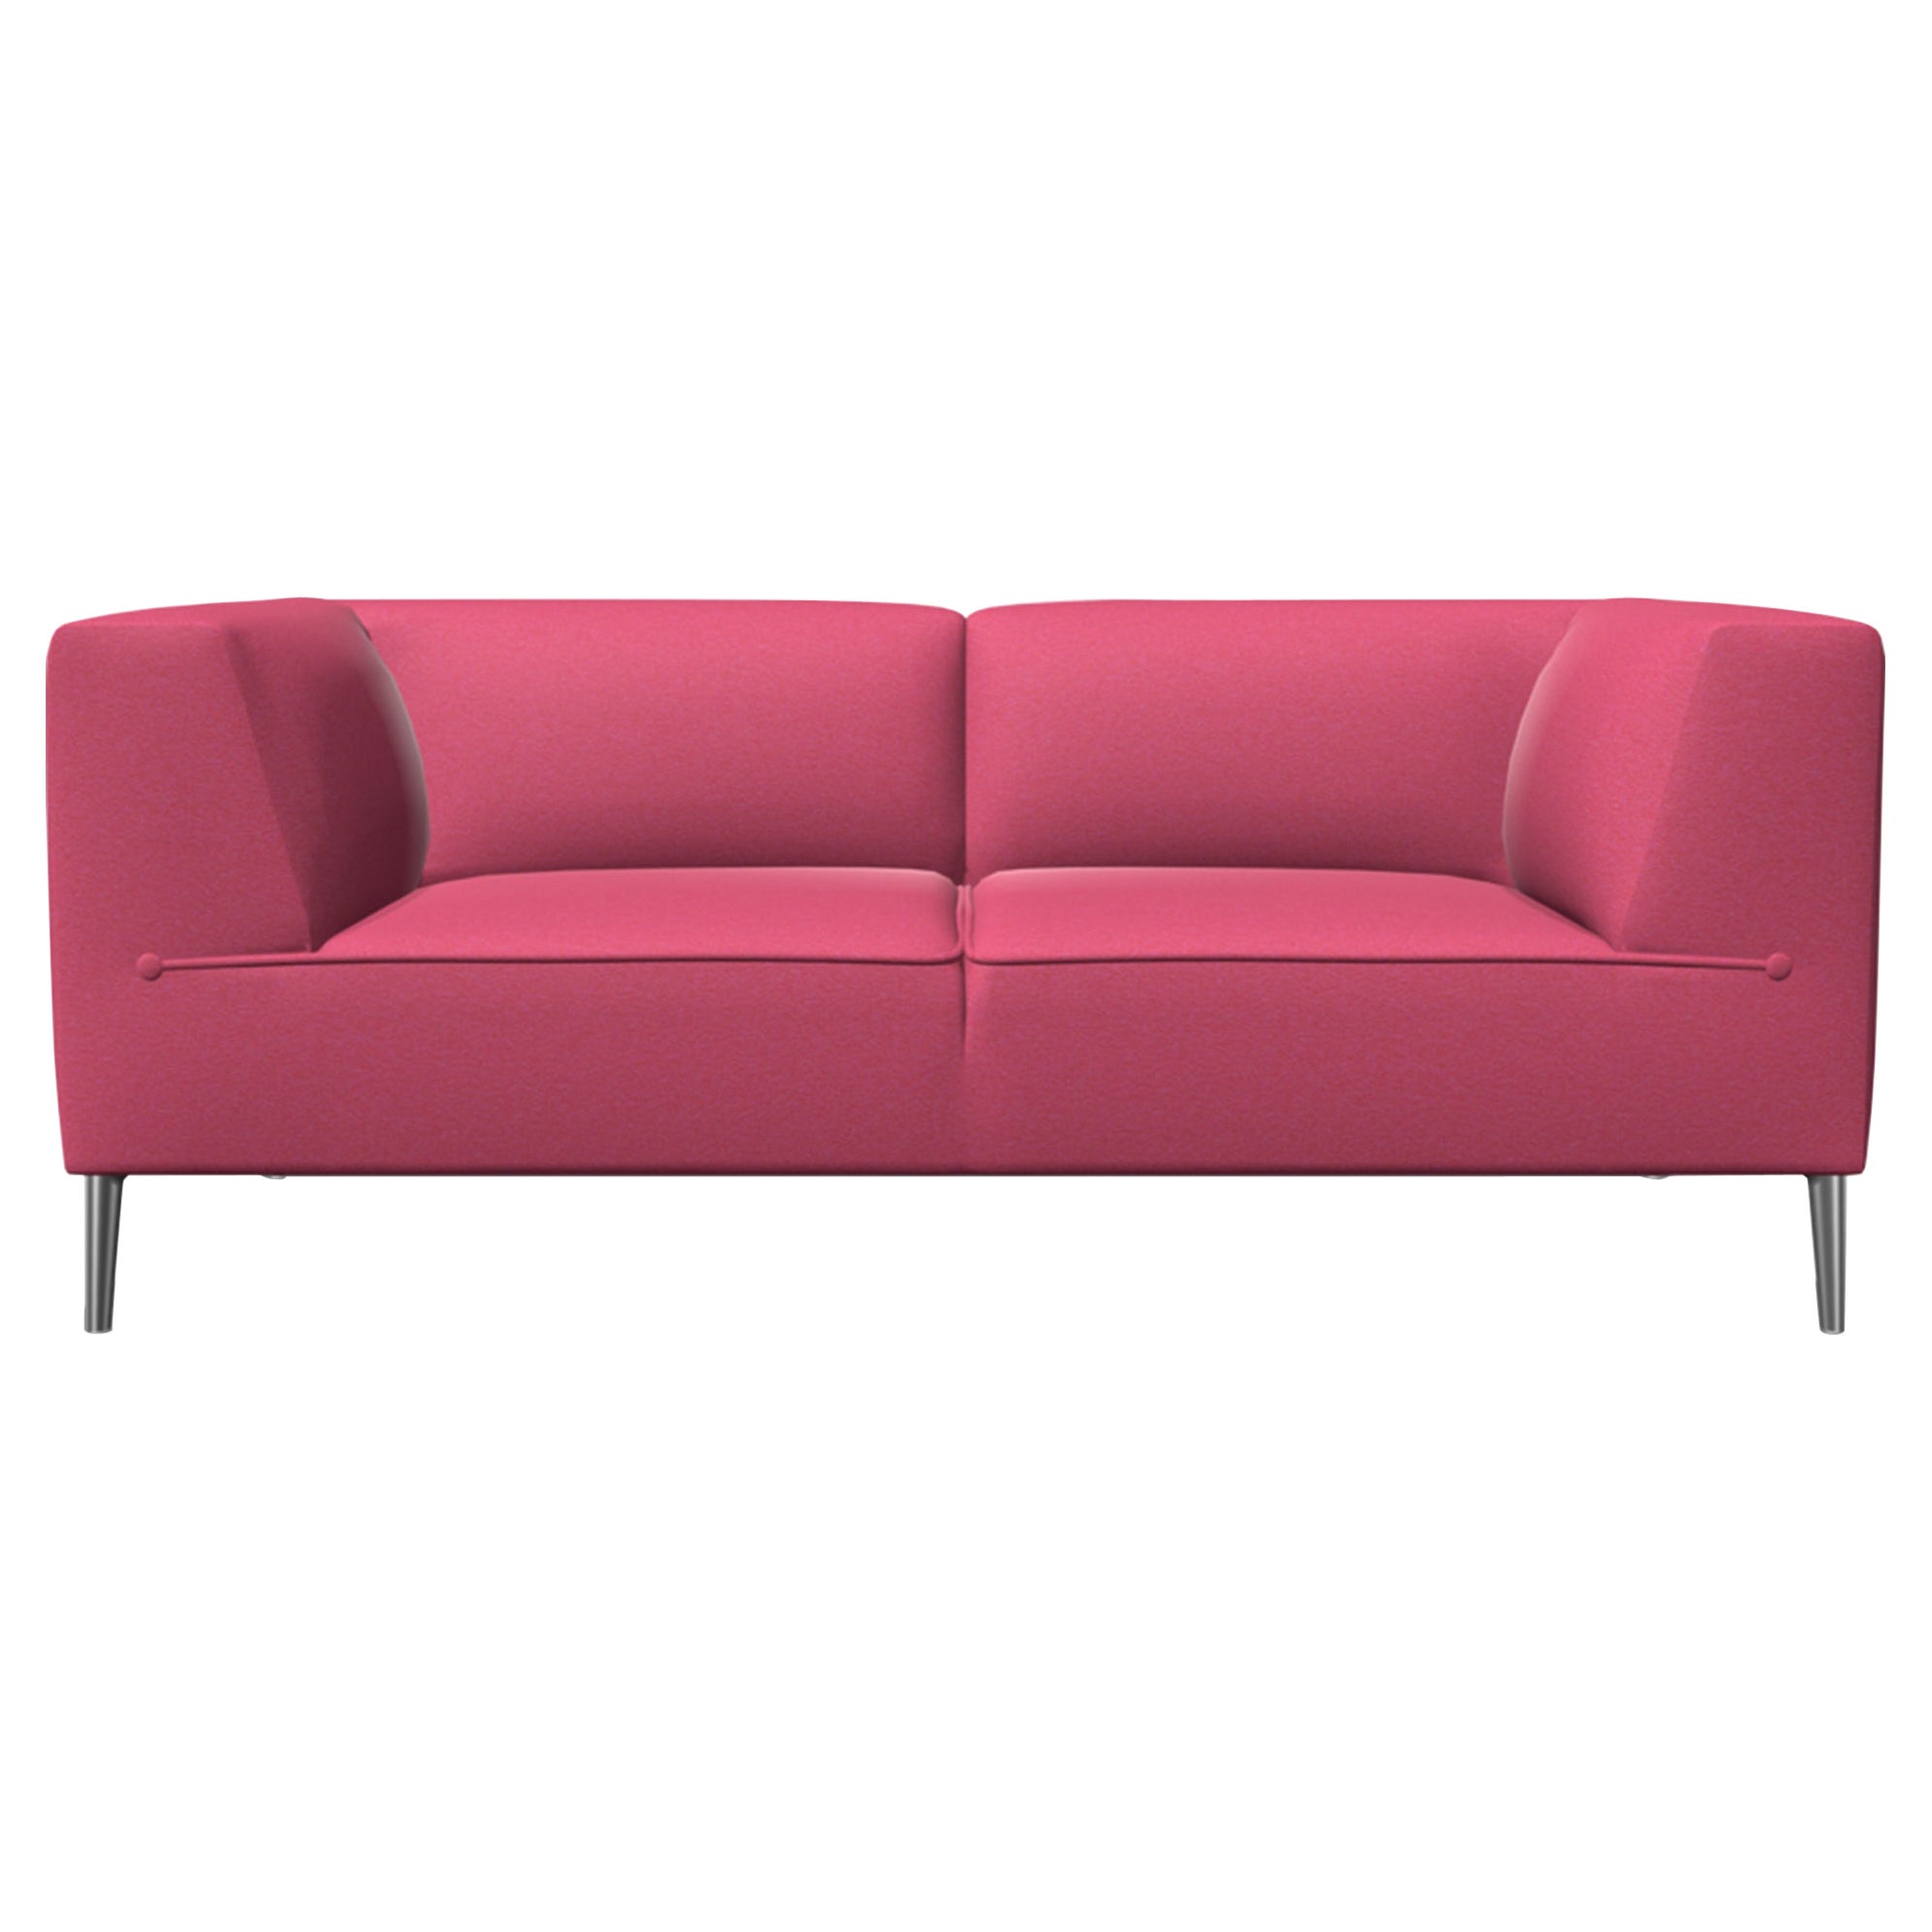 Moooi Double Seat Sofa So Good in Pink Upholstery with Polished Aluminum Feet For Sale